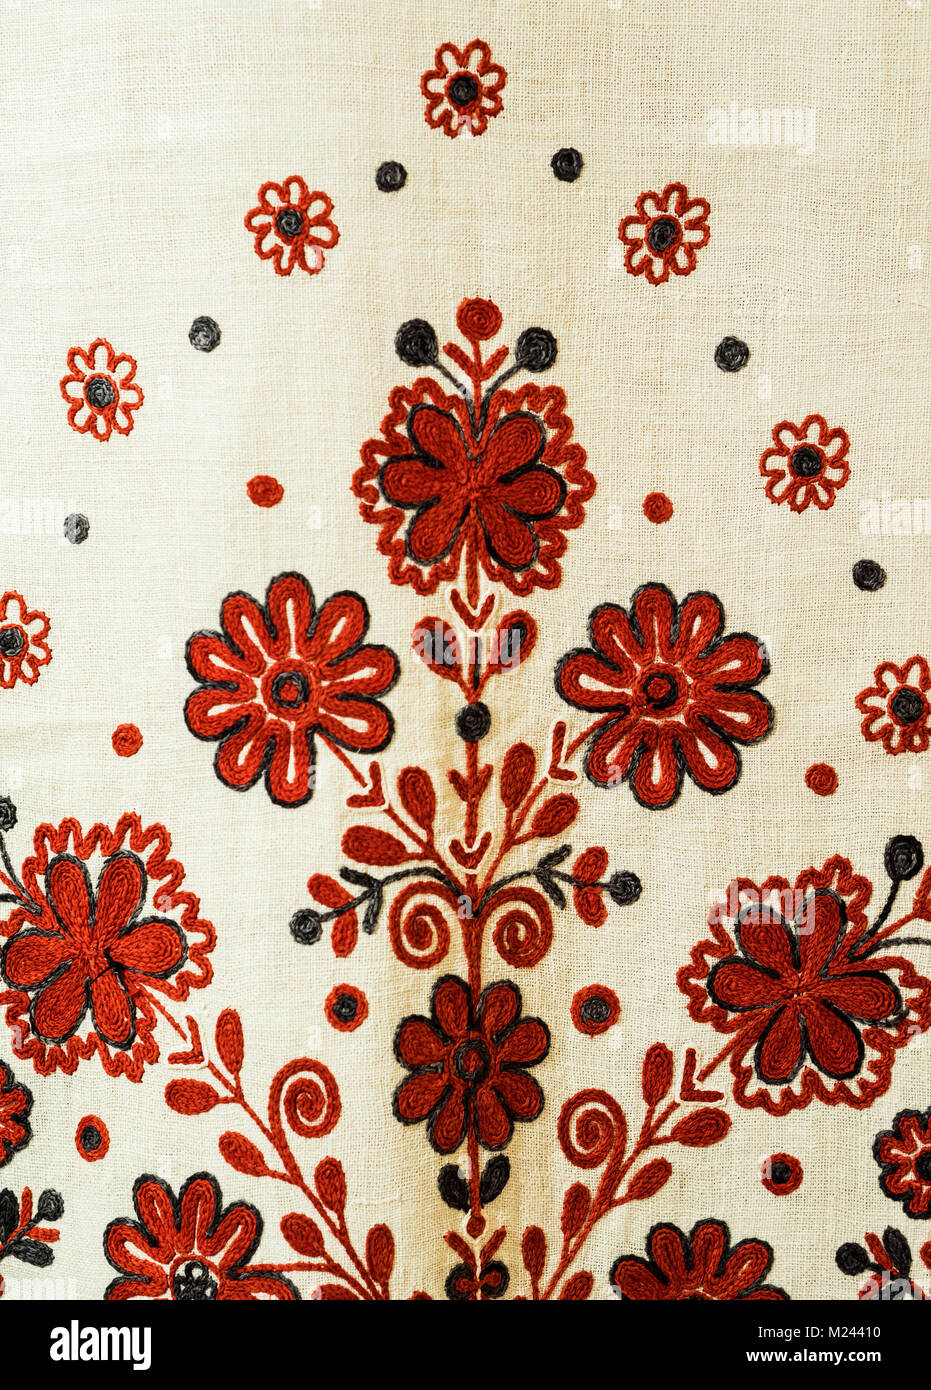 Traditional Ukrainian embroidery on a towel. 19th century. In the Local History Museum of Boryspil there is an exhibition where women's folk costumes of the late 19th and early 20th centuries are presented. Credit: Igor Golovnov/Alamy Live News Stock Photo